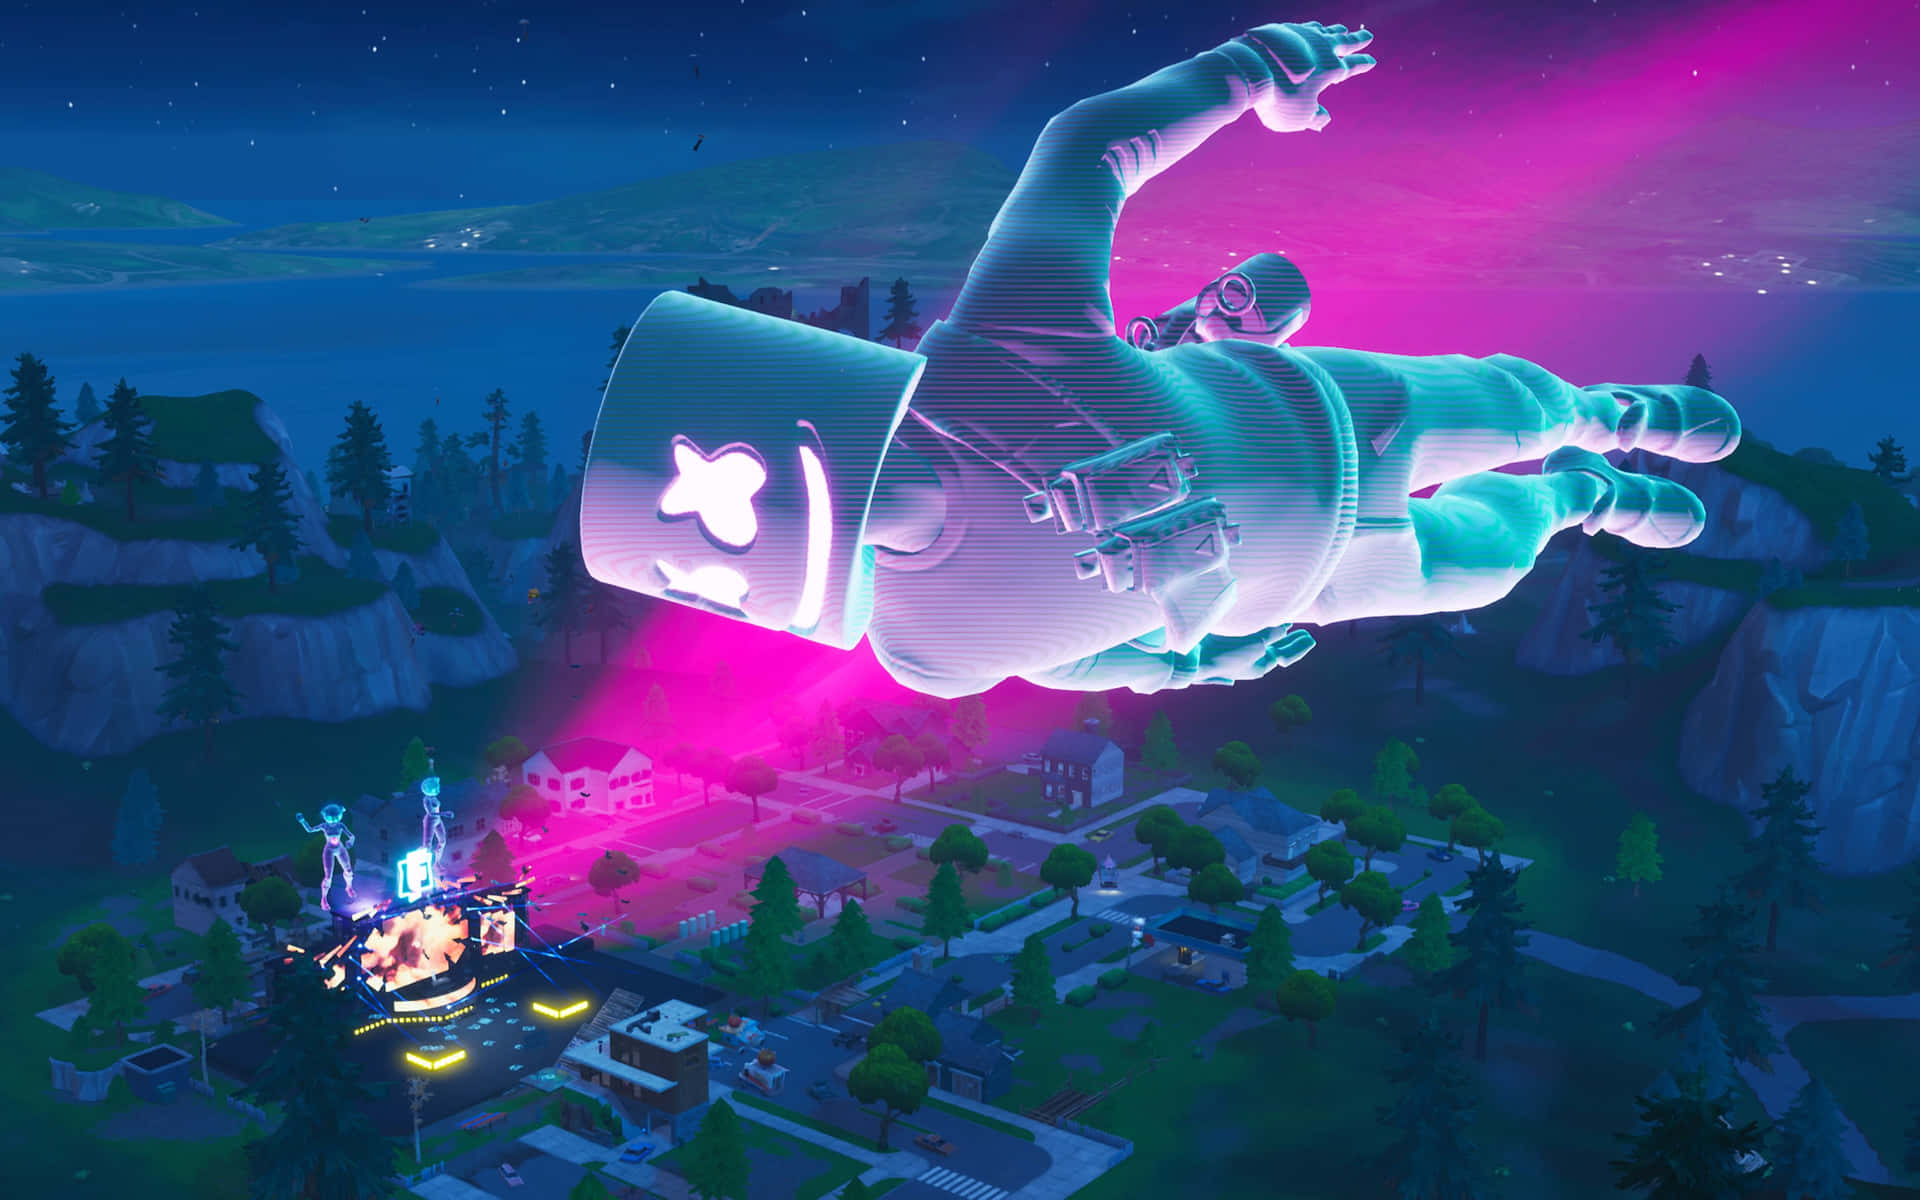 Fortnite and Marshmello unite for an unforgettable gaming experience! Wallpaper